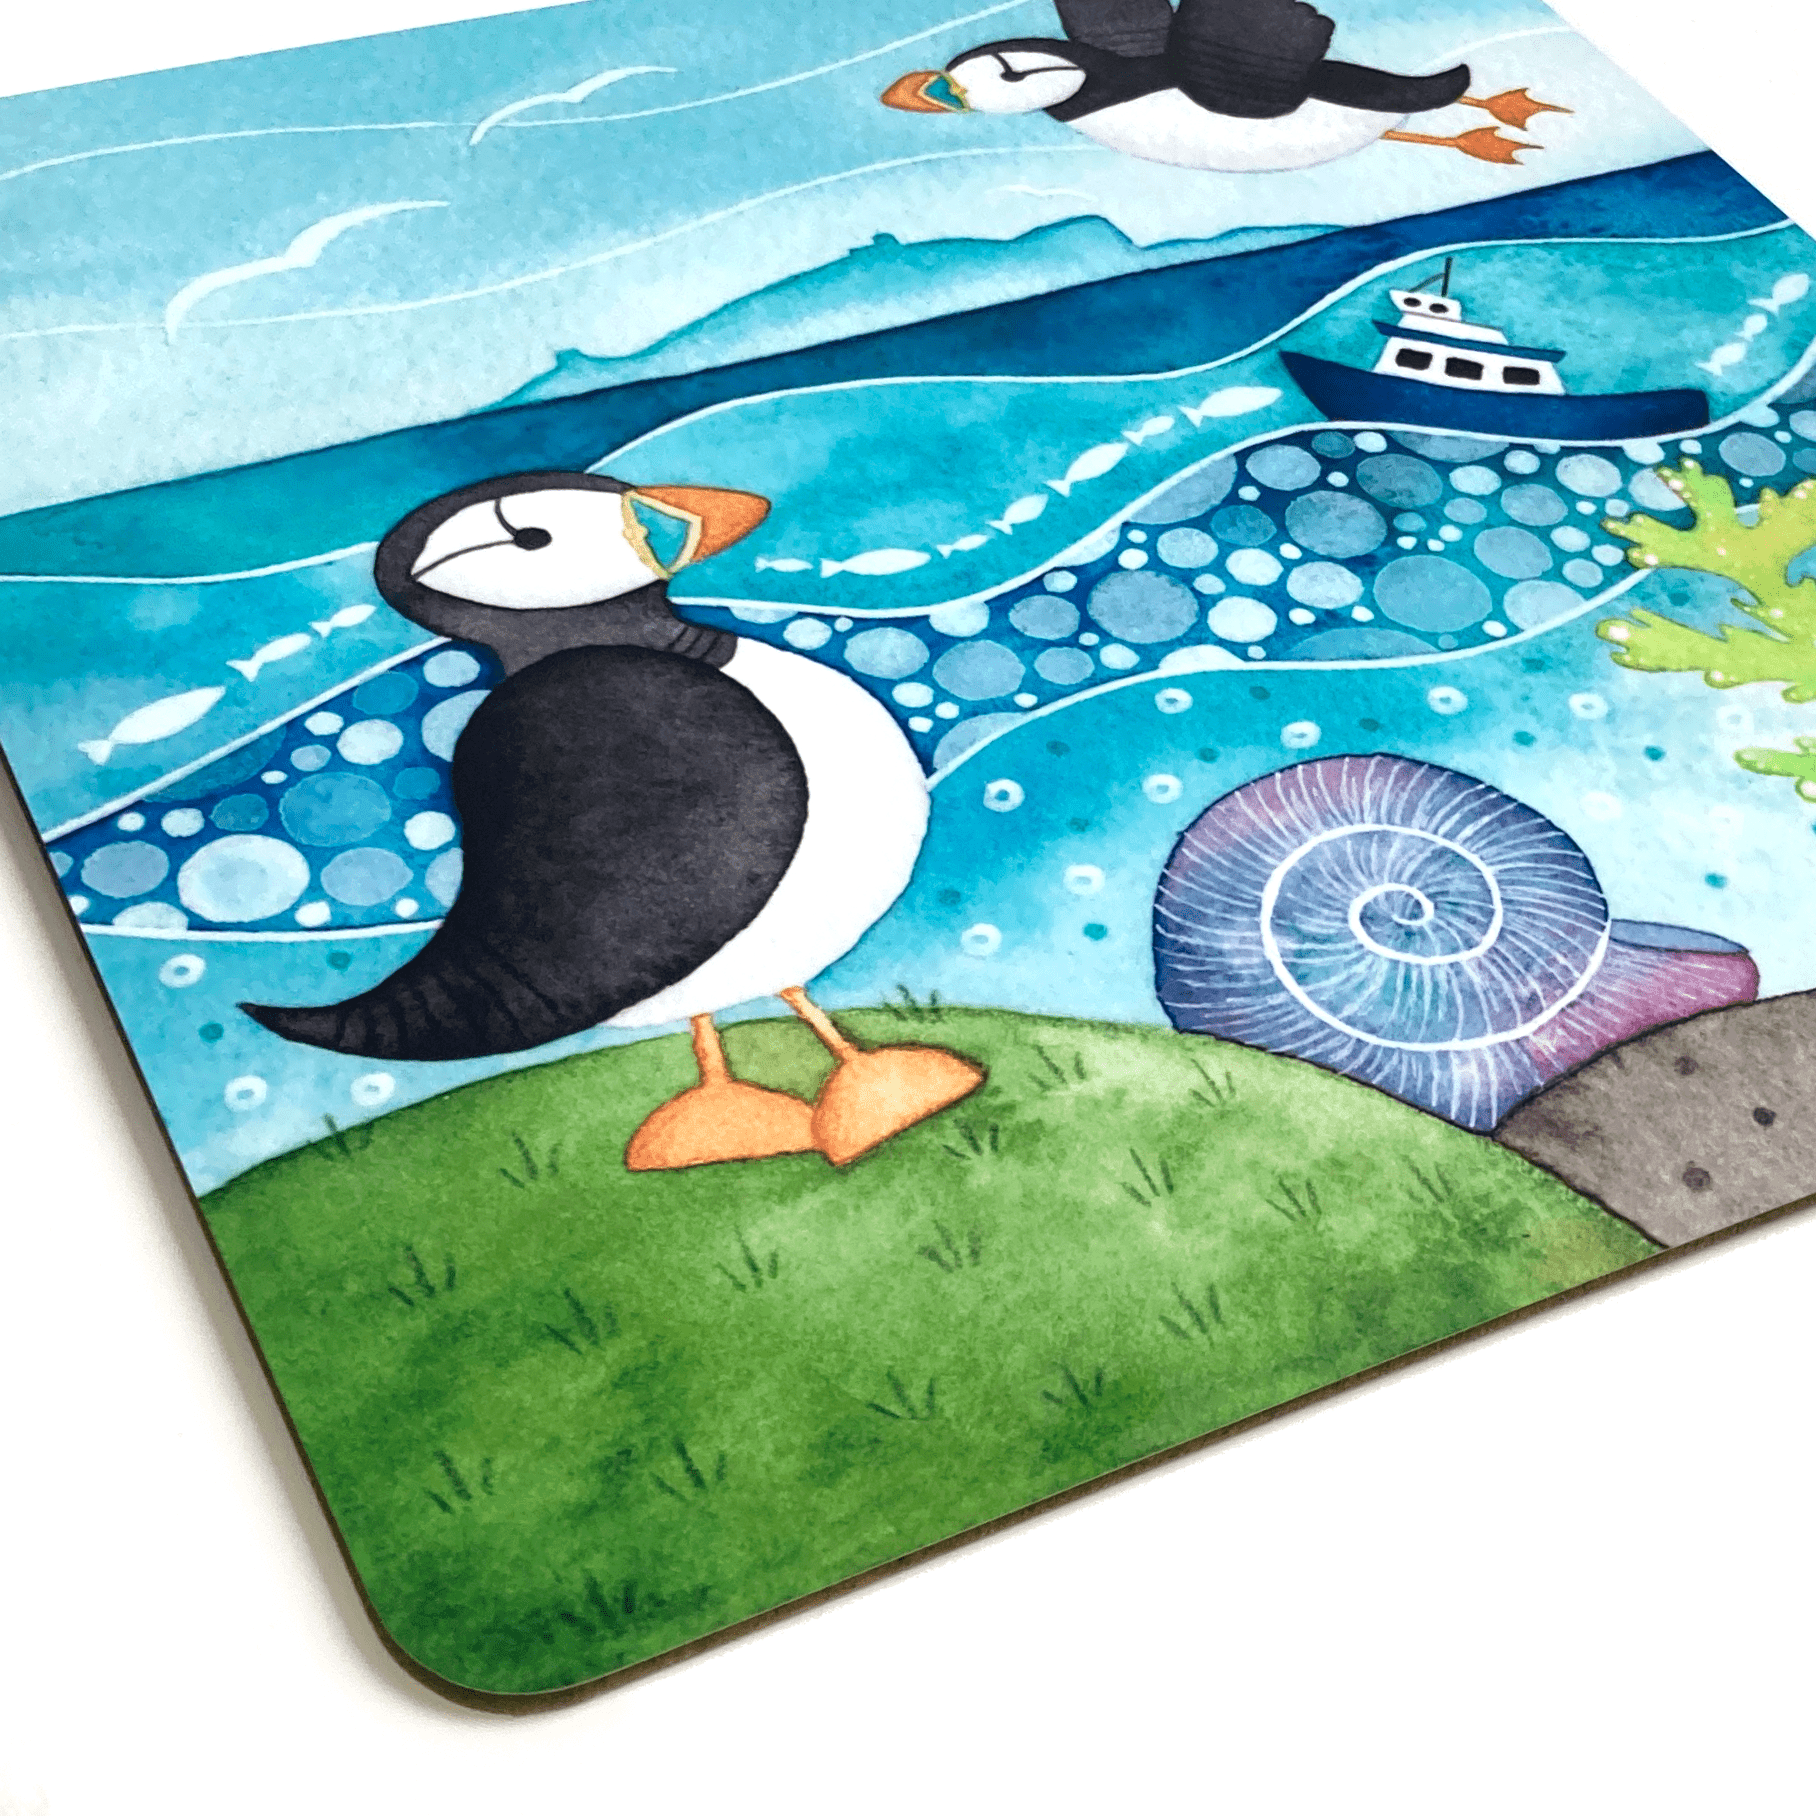 Placemat - Isle of May Puffins - Seaside Table Mats - East Neuk Beach Crafts